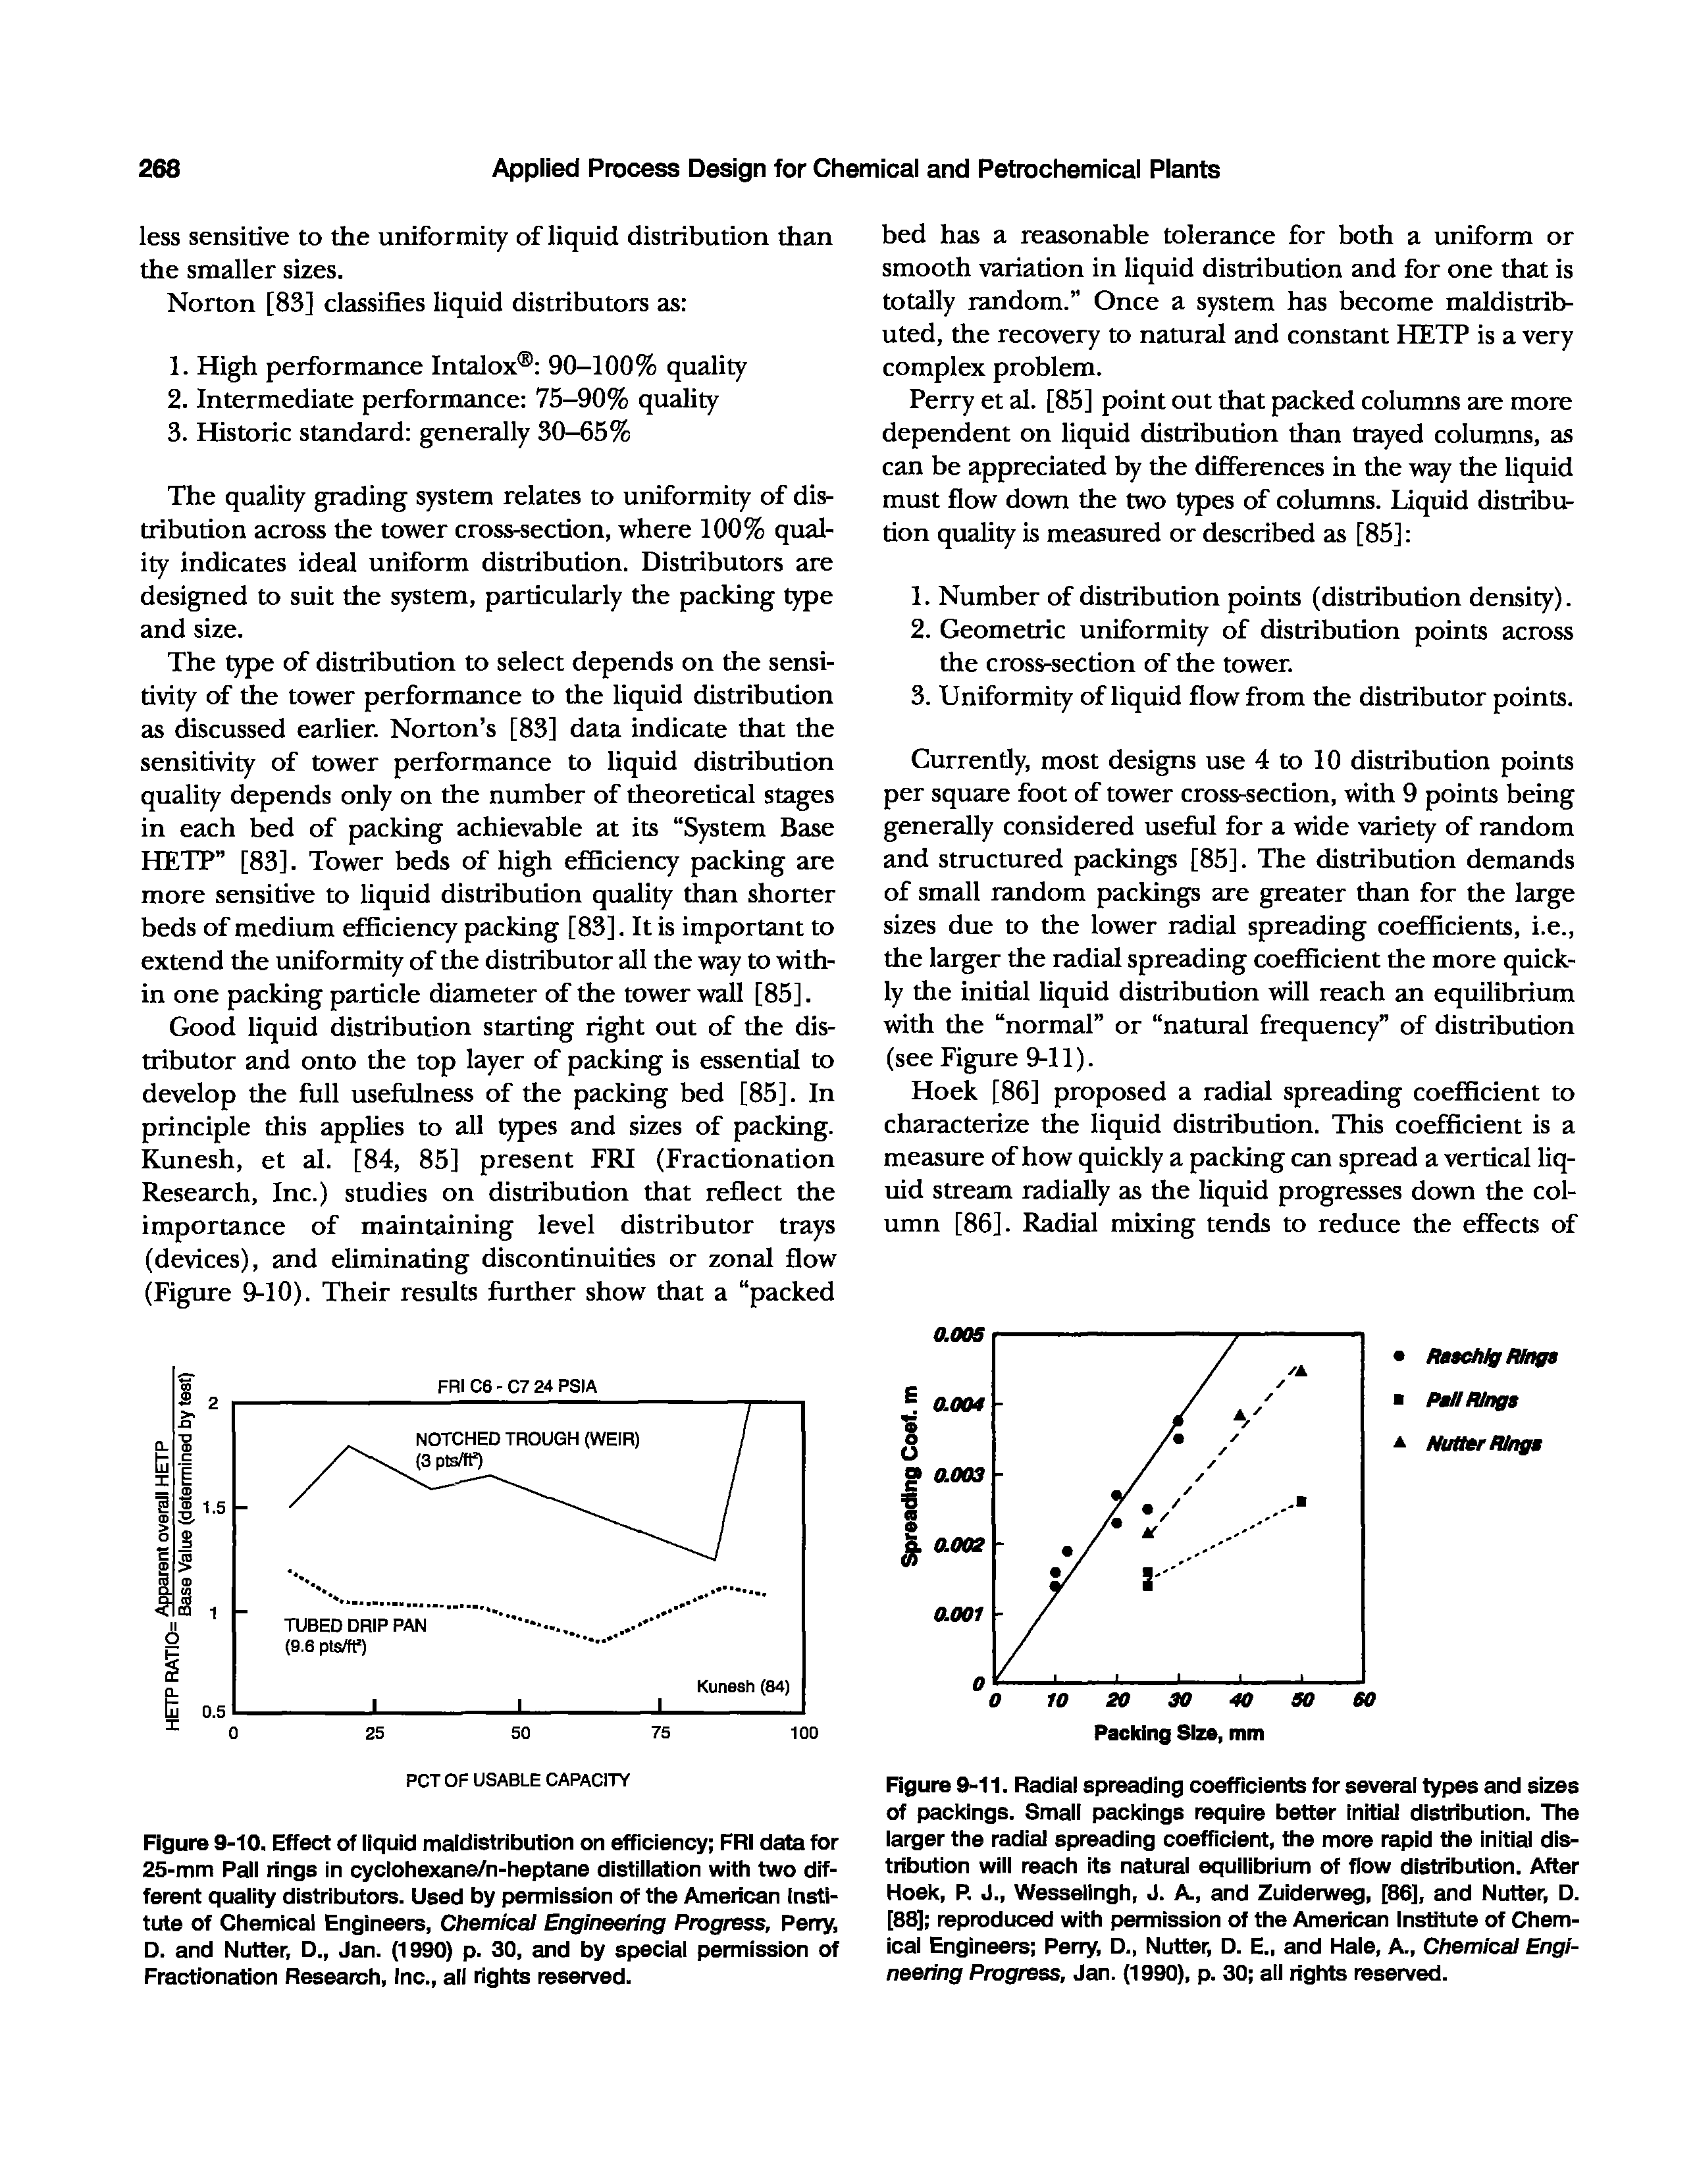 Figure 9-10. Effect of liquid maldistribution on efficiency FRI data for 25-mm Pall rings in cyciohexane/n-heptane distillation with two different quality distributors. Used by permission of the American Institute of Chemical Engineers, Chemical Engineering Progress, Perry, D. and Nutter, ., Jan. (1990) p. 30, and by special permission of Fractionation Research, Inc., all rights reserved.